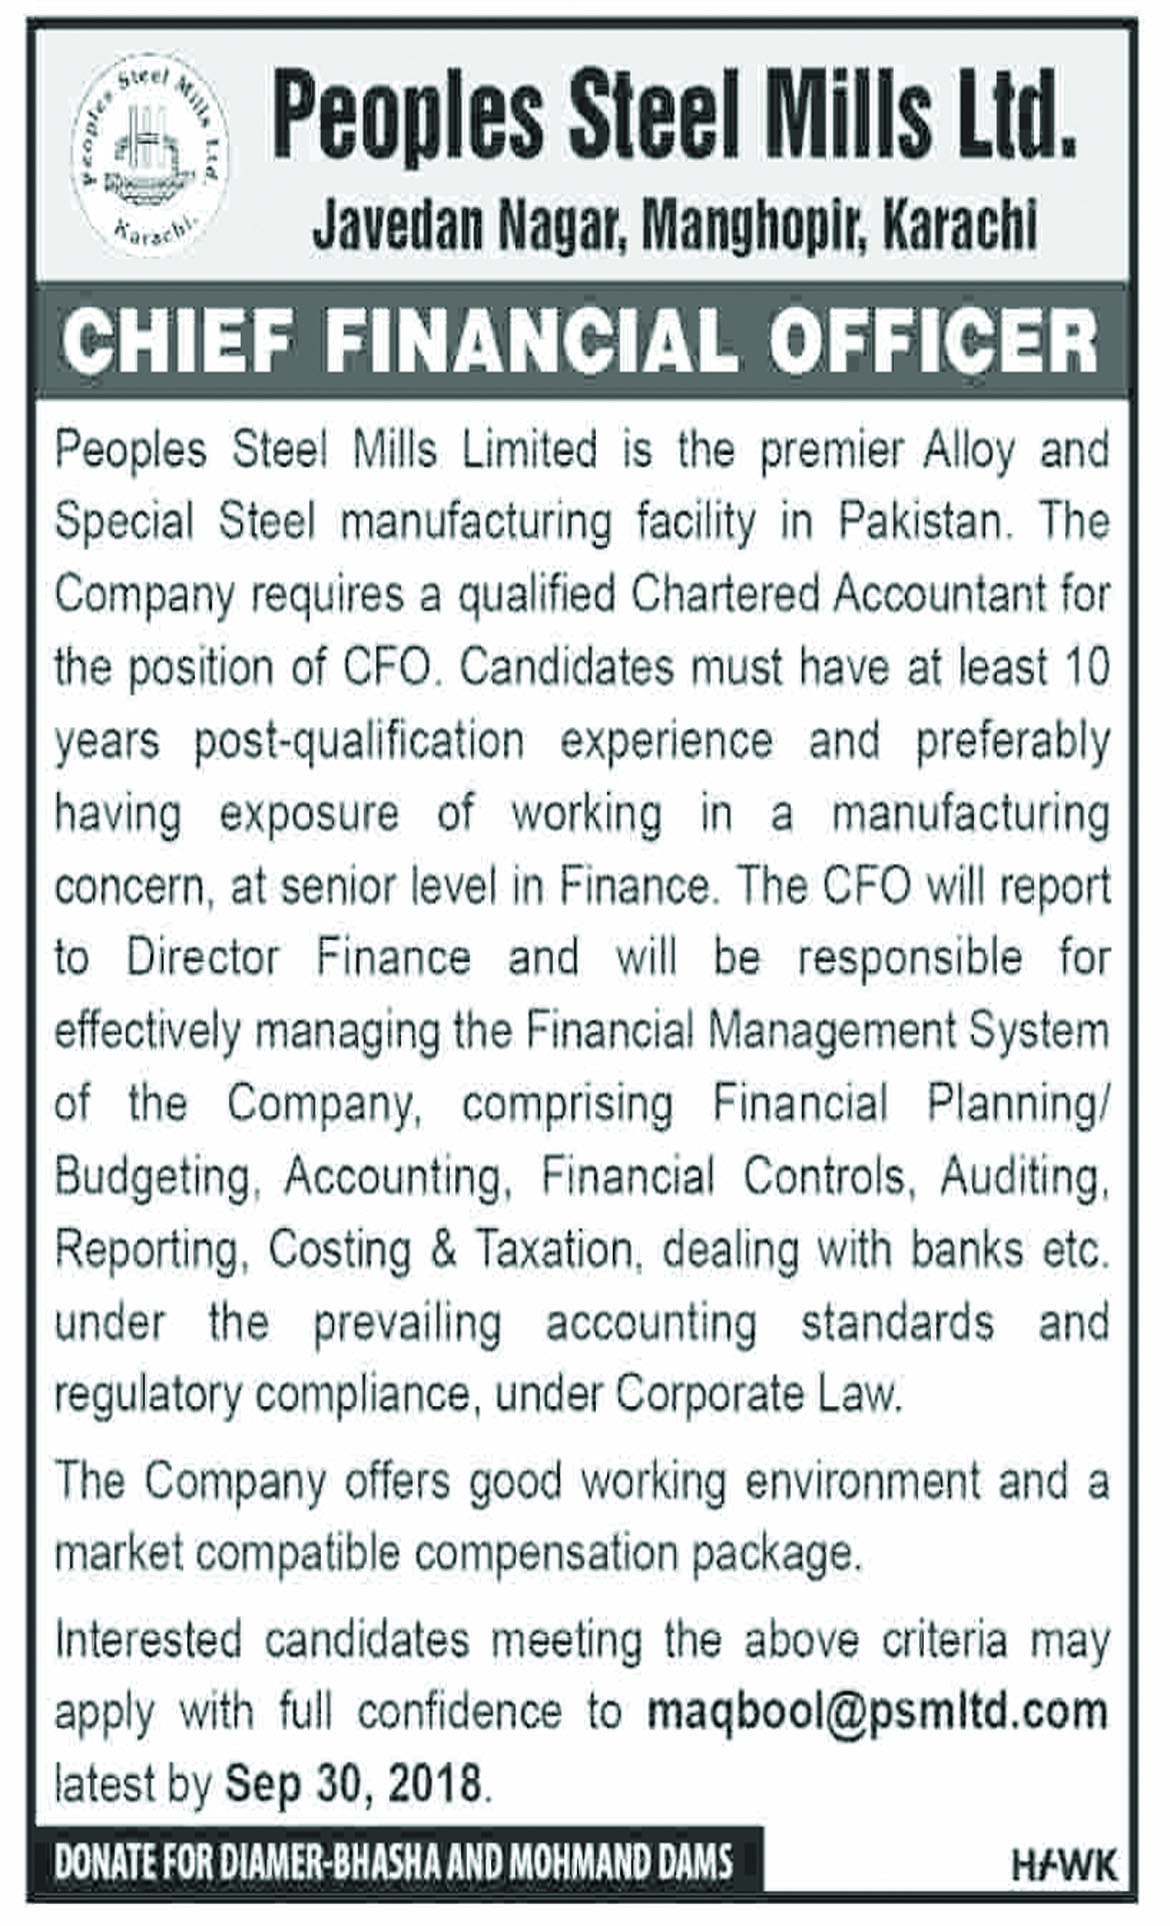 Chief Financial Officer Jobs In Peoples Steel Mills Limited 17 Sep 2018